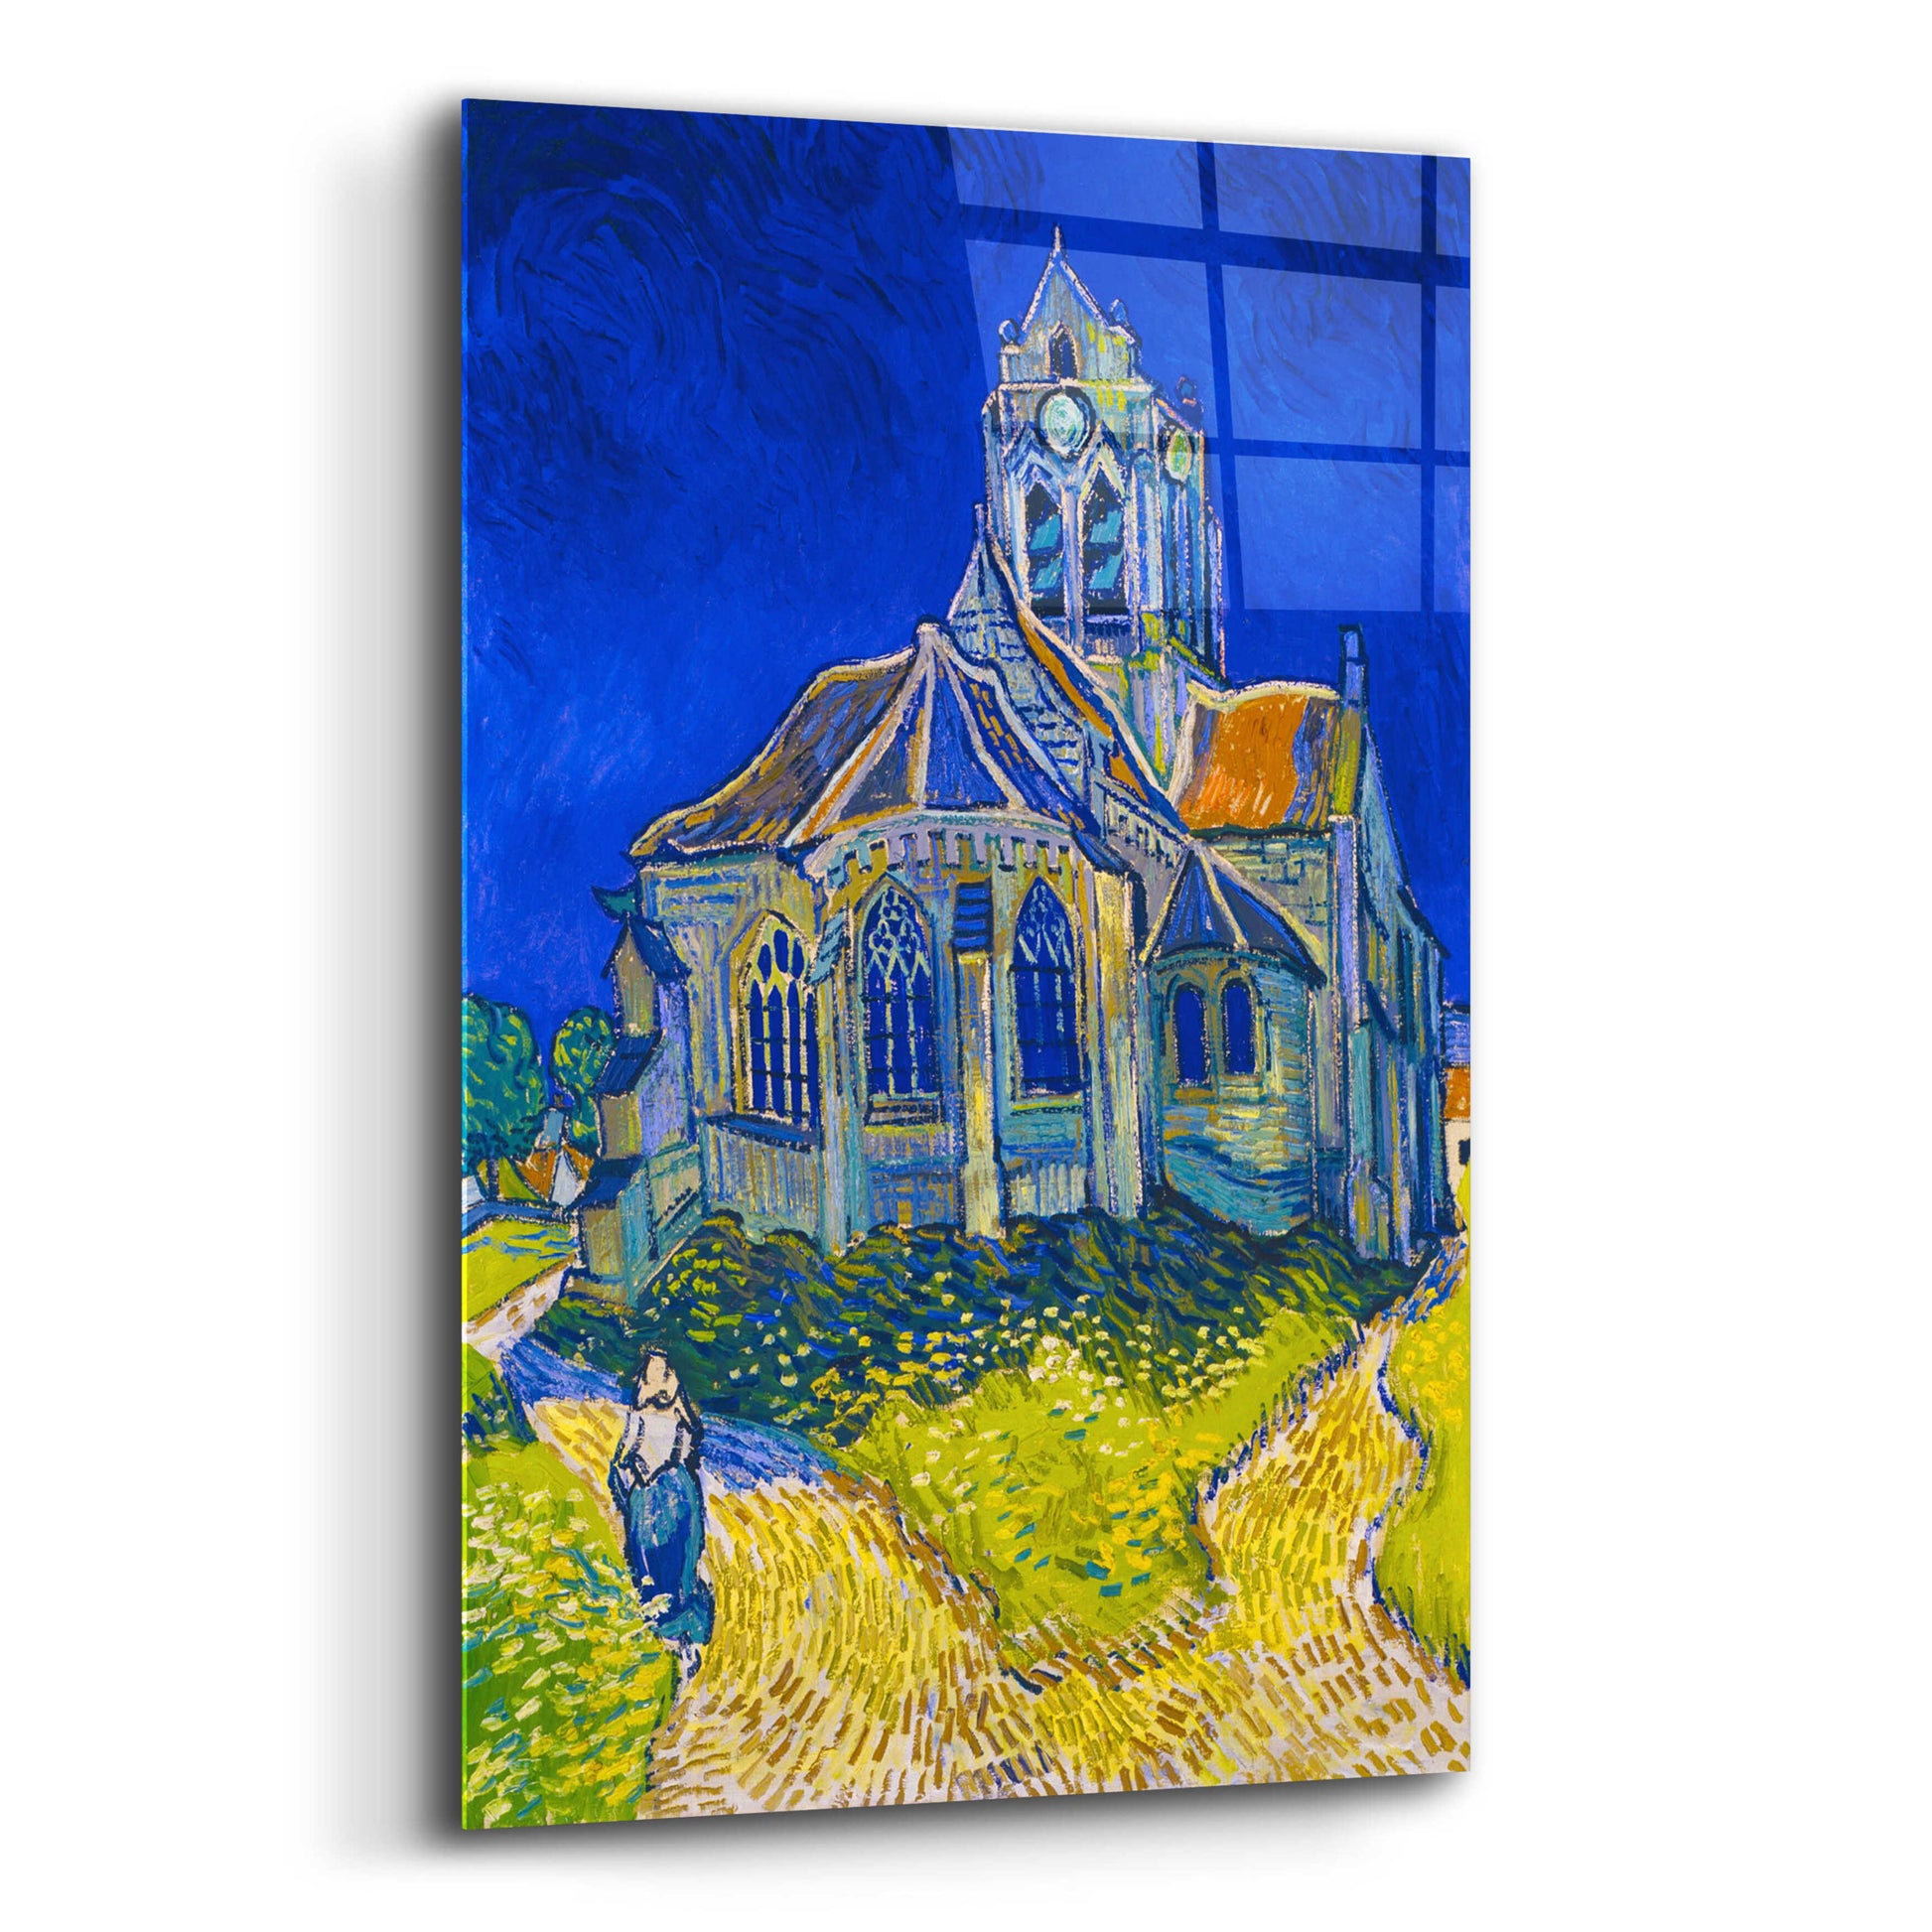 Epic Art 'The Church In Auvers-Sur-Oise, View From The Chevet' by Vincent Van Gogh, Acrylic Glass Wall Art,12x16